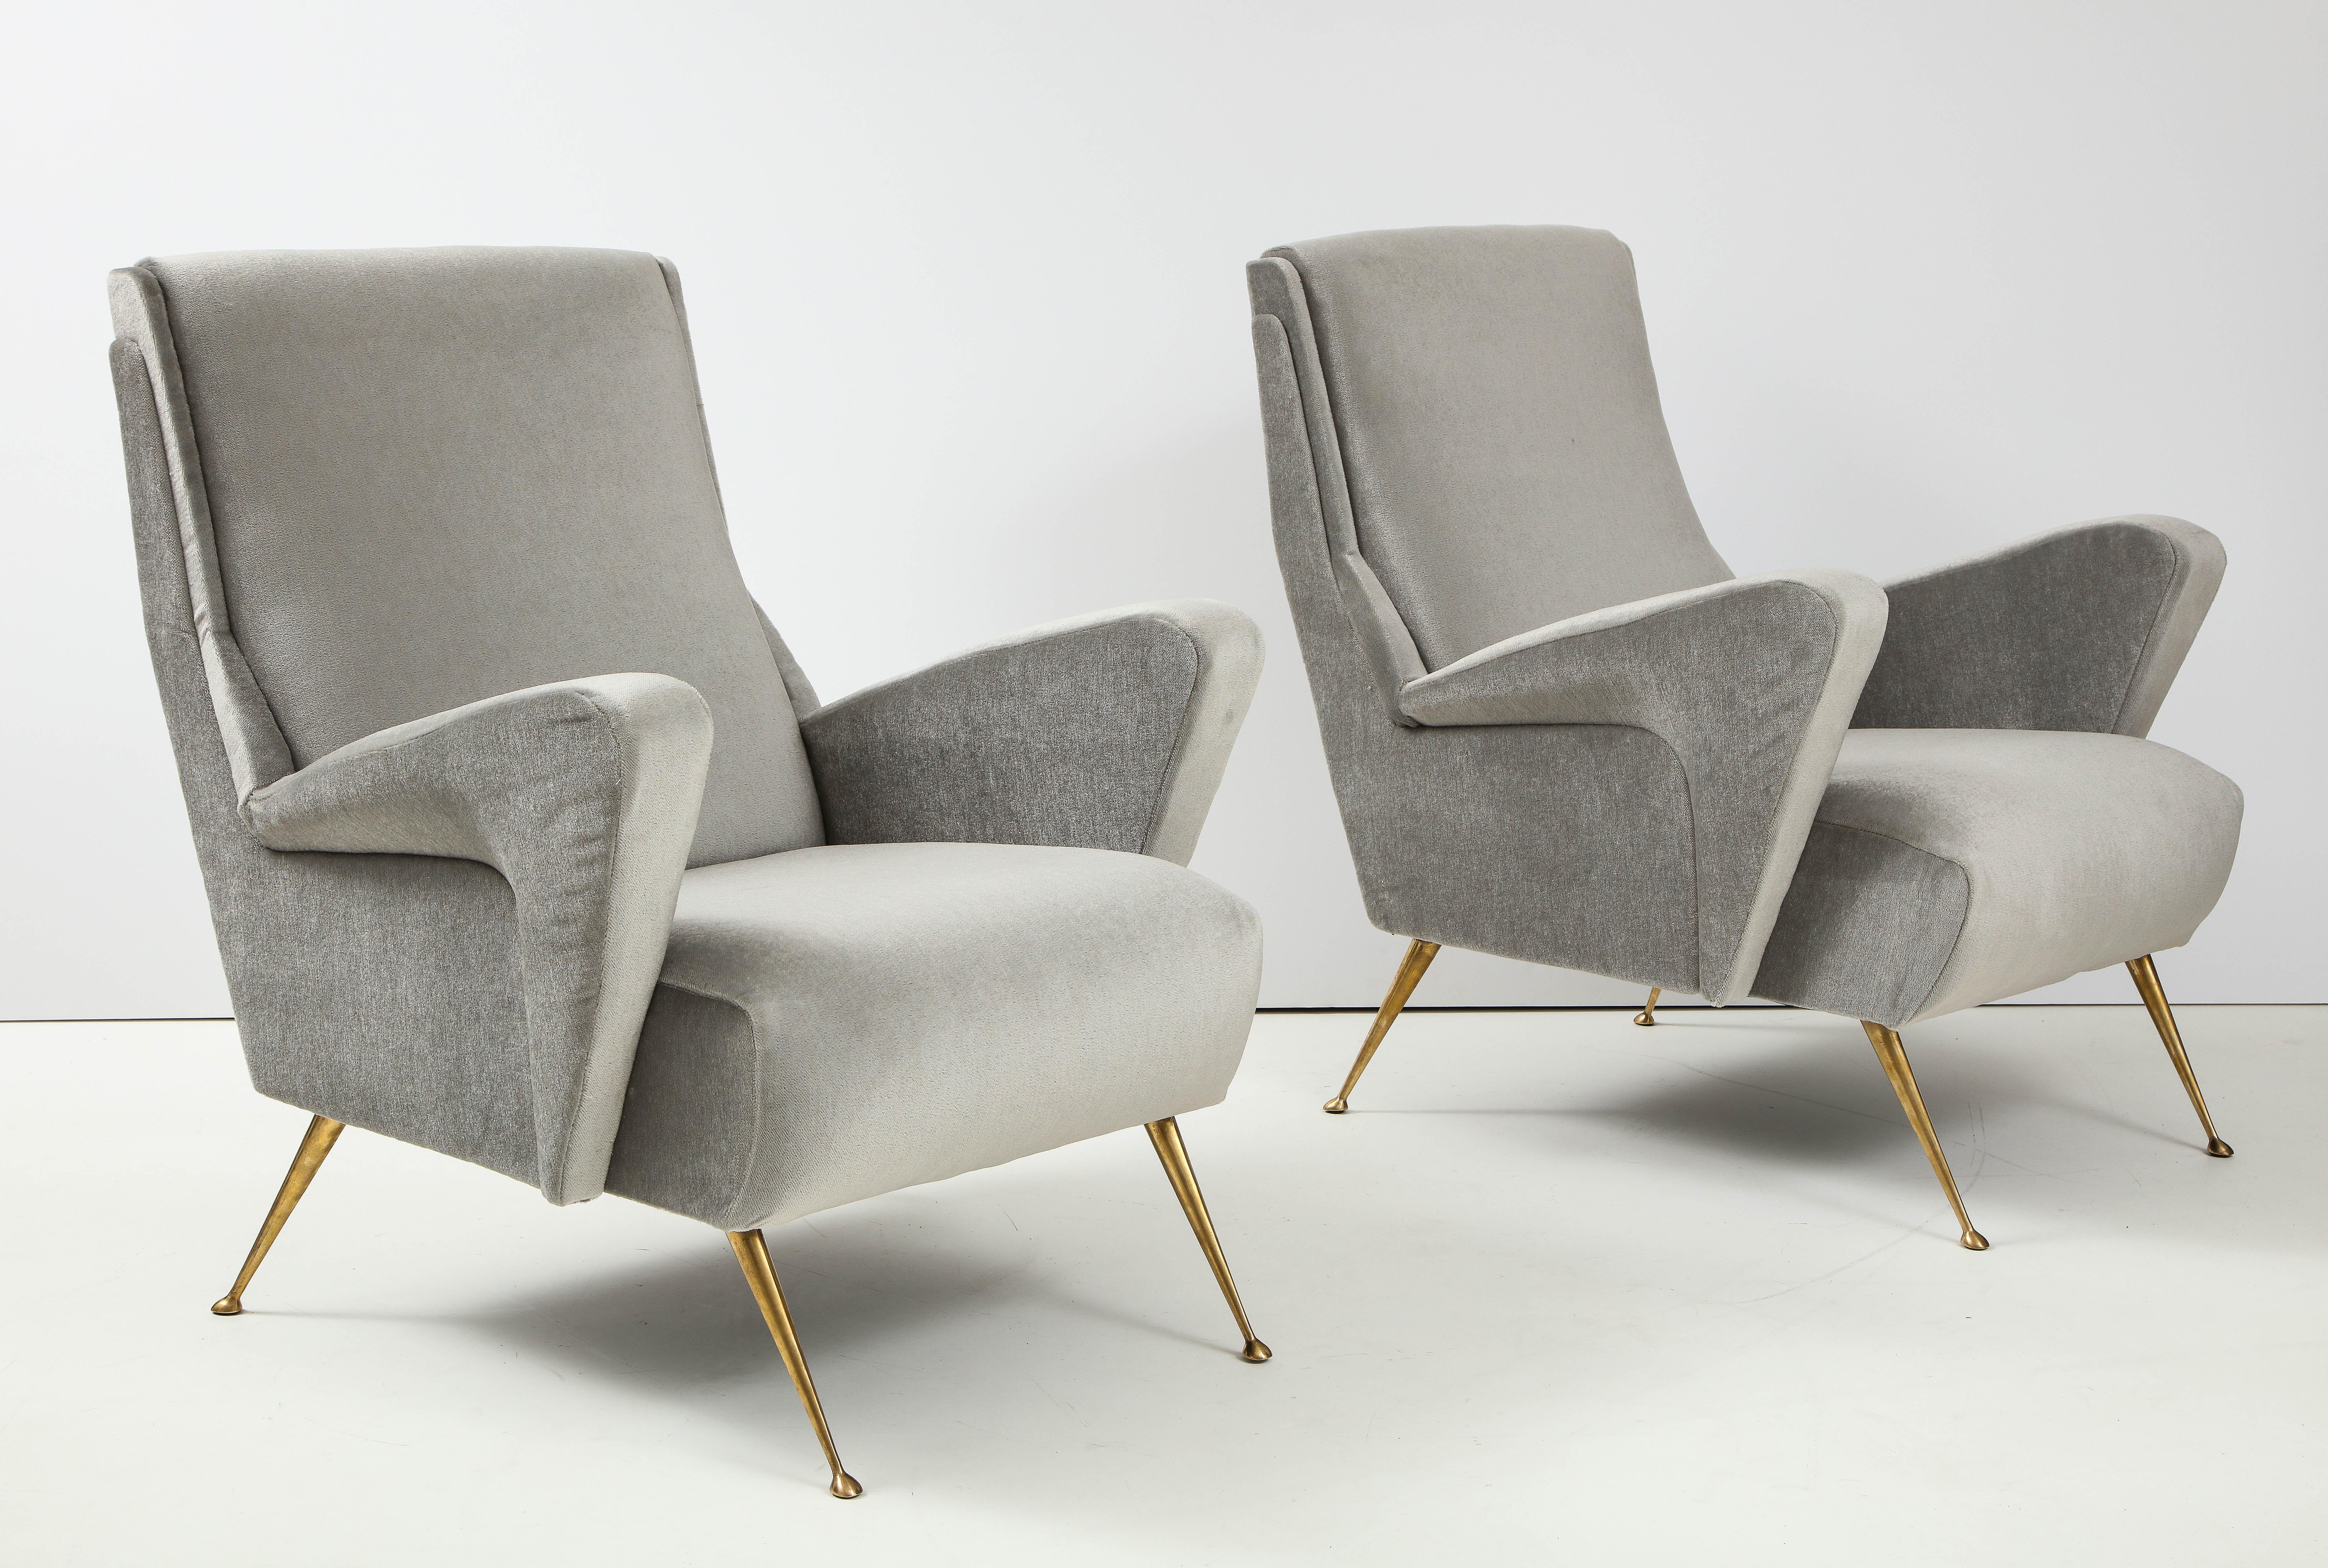 1950's Modernist Sculptural Italian Lounge Chairs with Solid Brass Legs 6